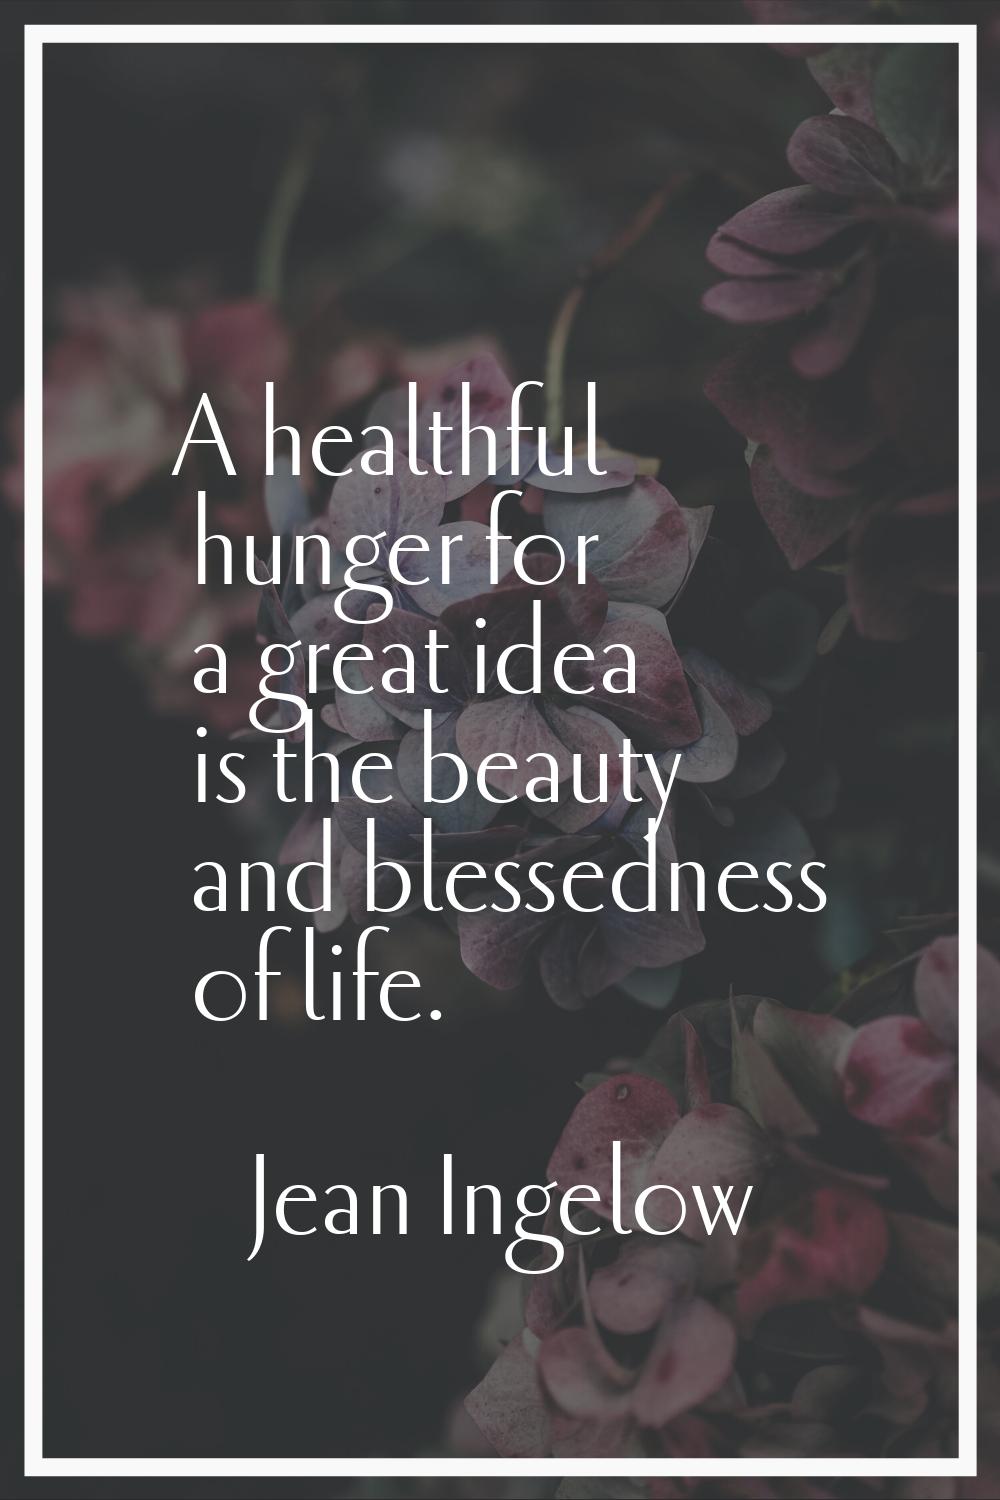 A healthful hunger for a great idea is the beauty and blessedness of life.